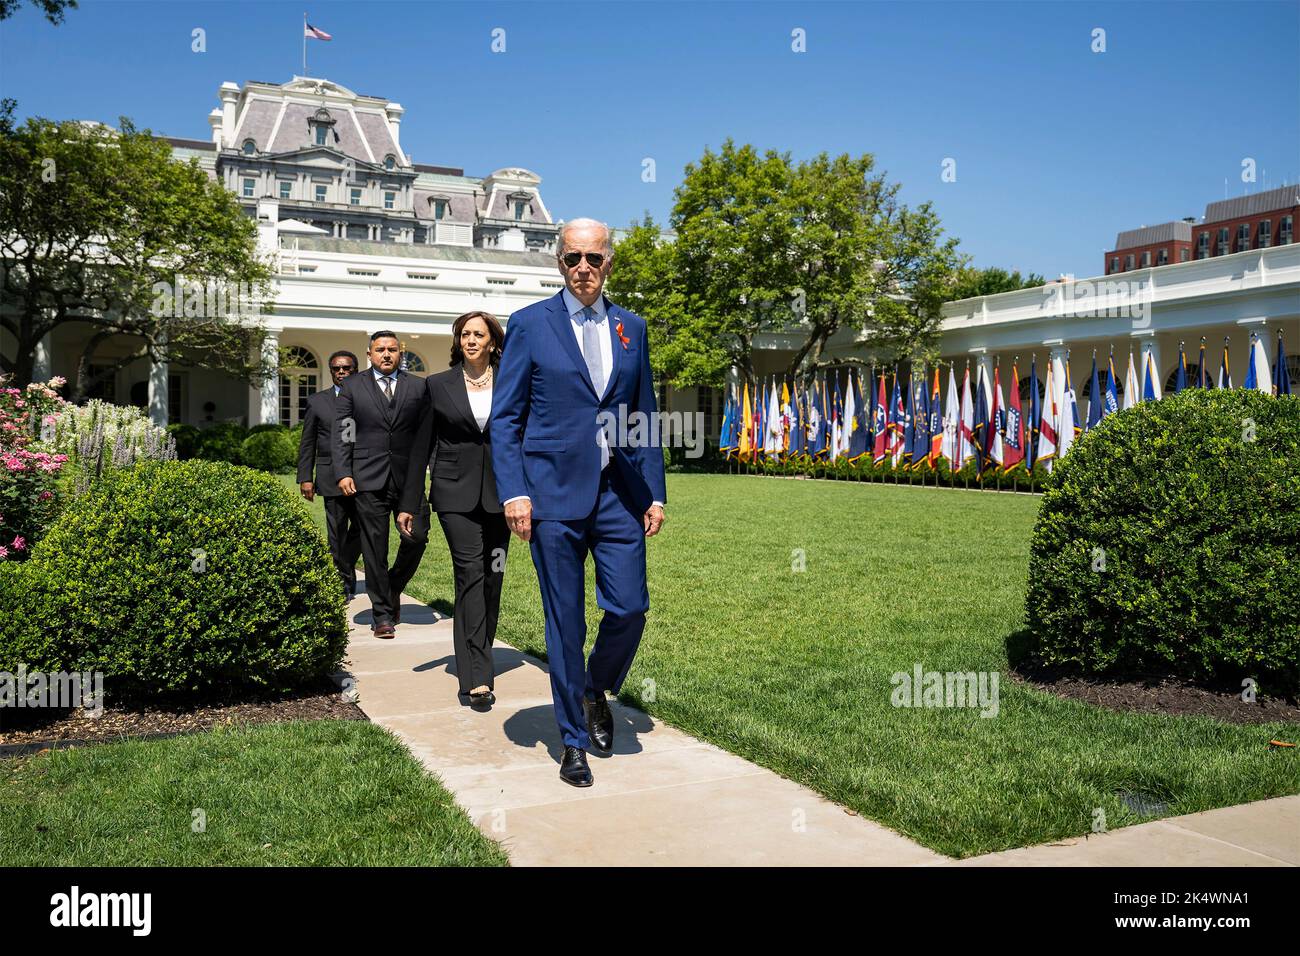 Washington, United States. 11 July, 2022. U.S. President Joe Biden, Vice President Kamala Harris joined by guests Garnell Whitfield Jr, and Dr. Roy Guerrero, walk through the Rose Garden to attend an event celebrating the passage of the Bipartisan Safer Communities Act at the White House, July 11, 2022, in Washington, D.C. Washington, United States. 11 July, 2022. Stock Photo